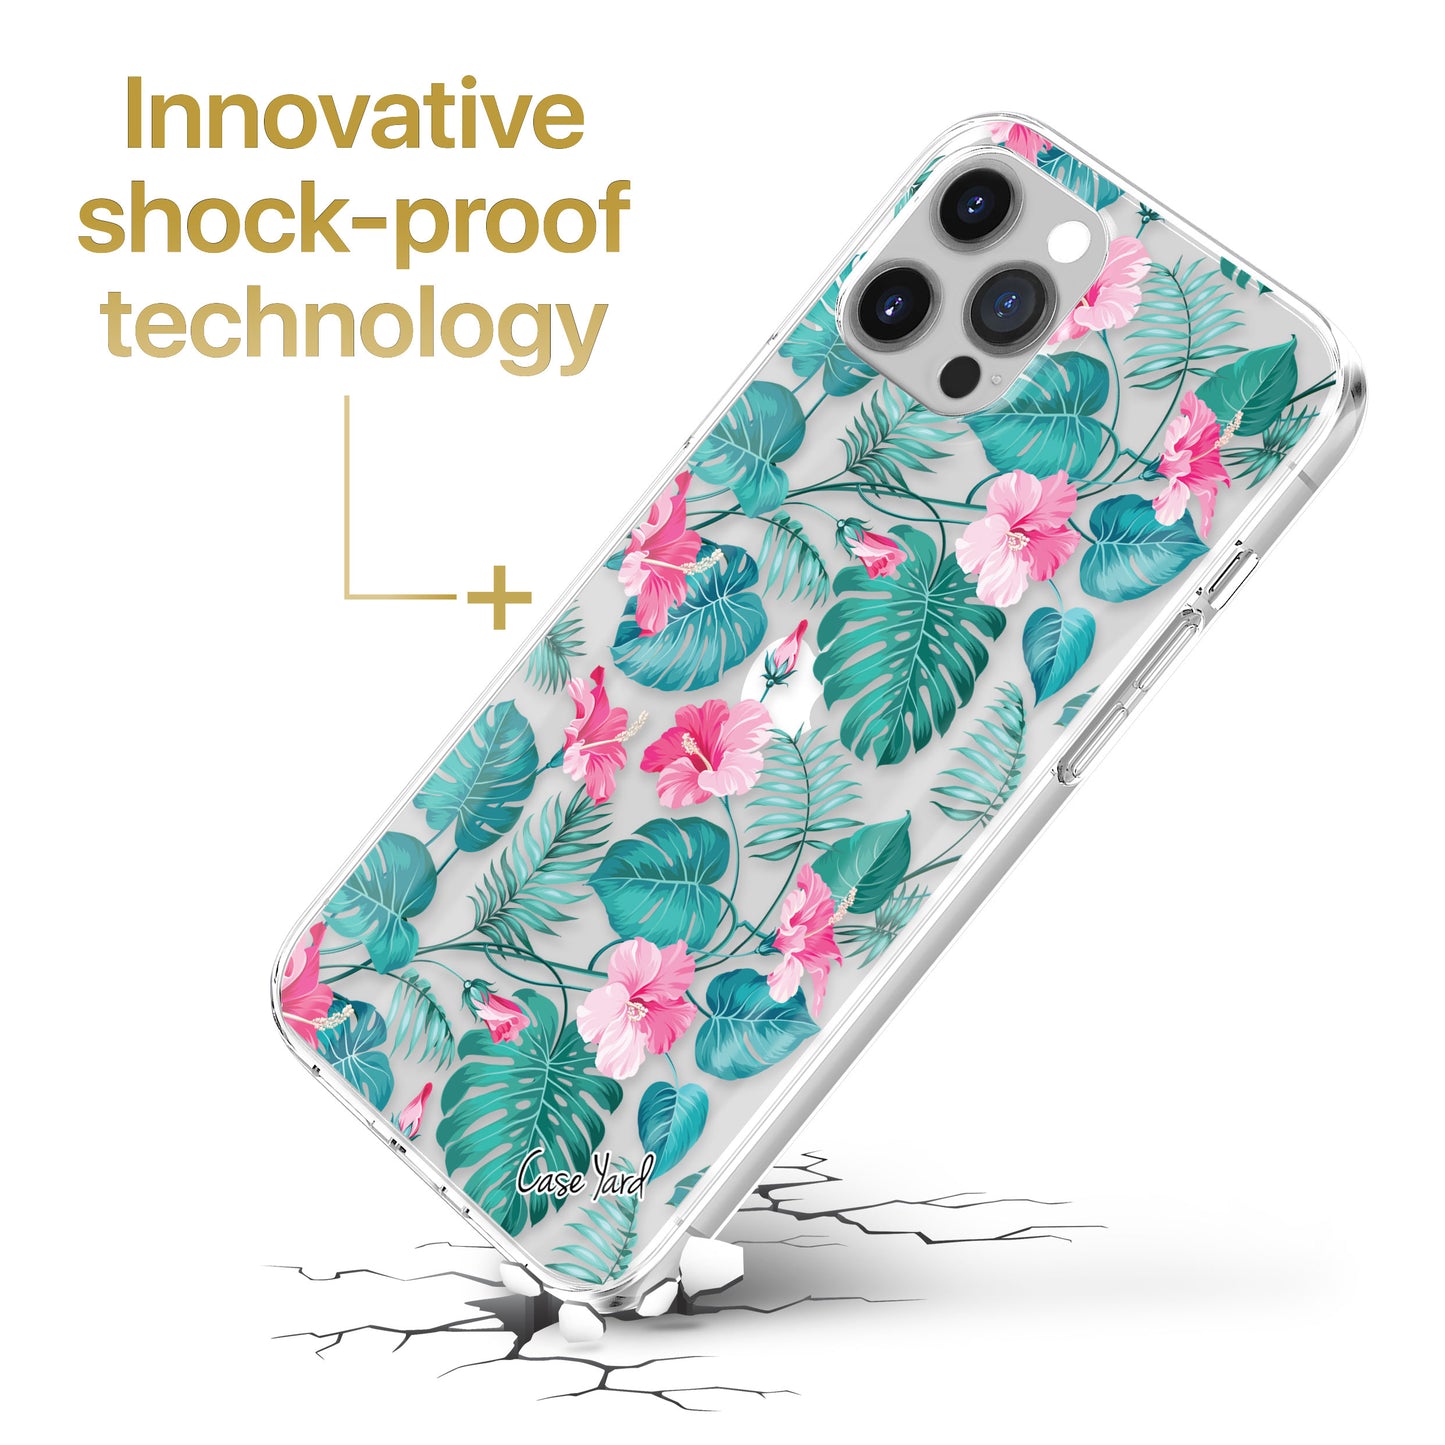 TPU Case Clear case with (Hibiscus Flowers) Design for iPhone & Samsung Phones